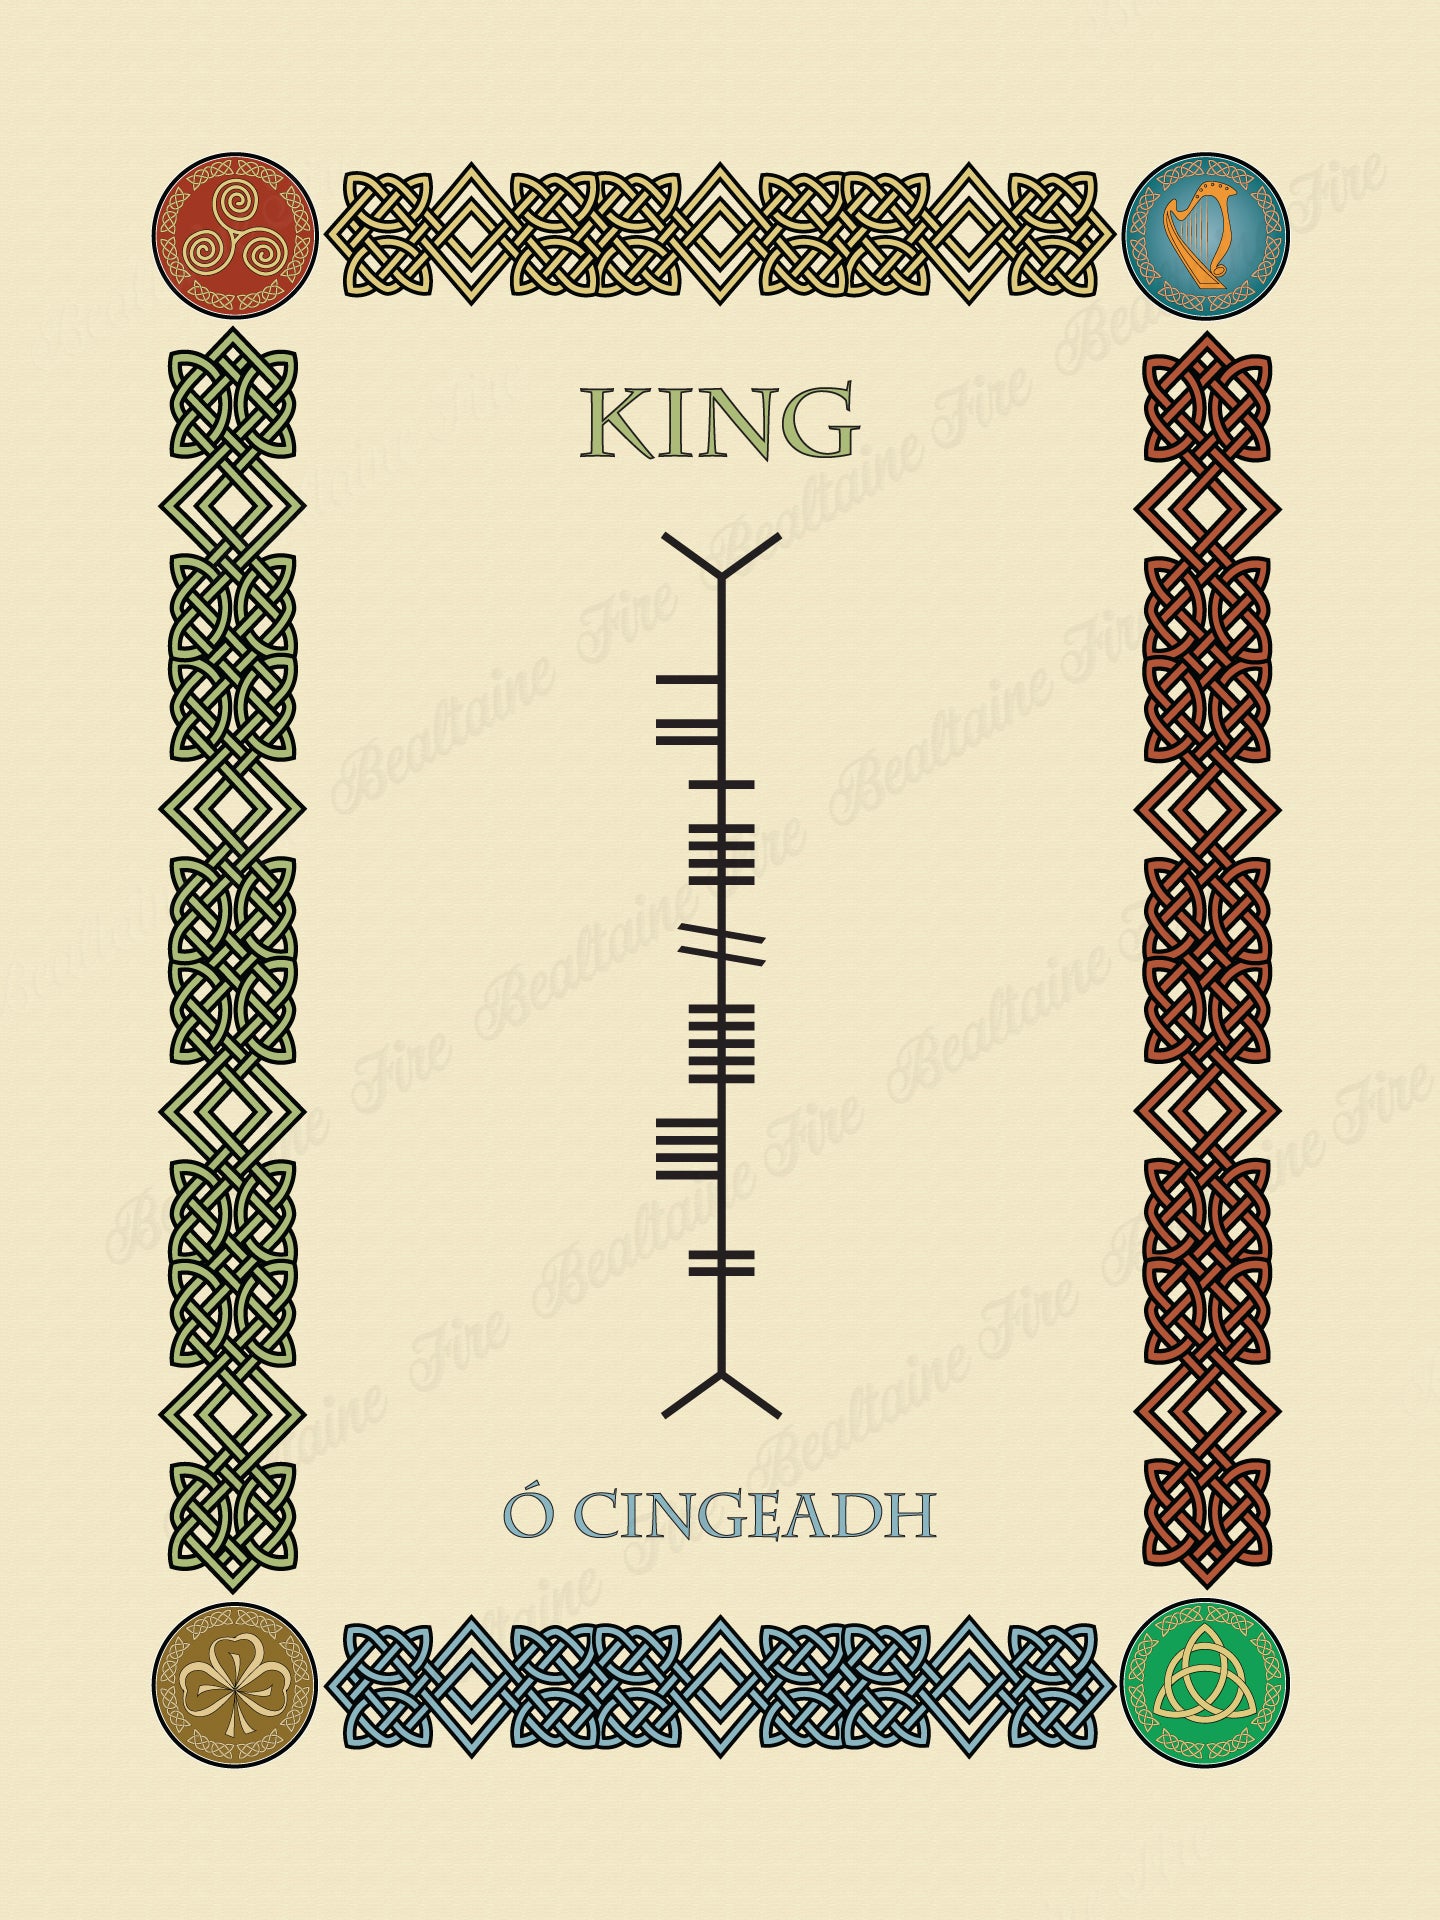 King in Old Irish and Ogham - Premium luster unframed print